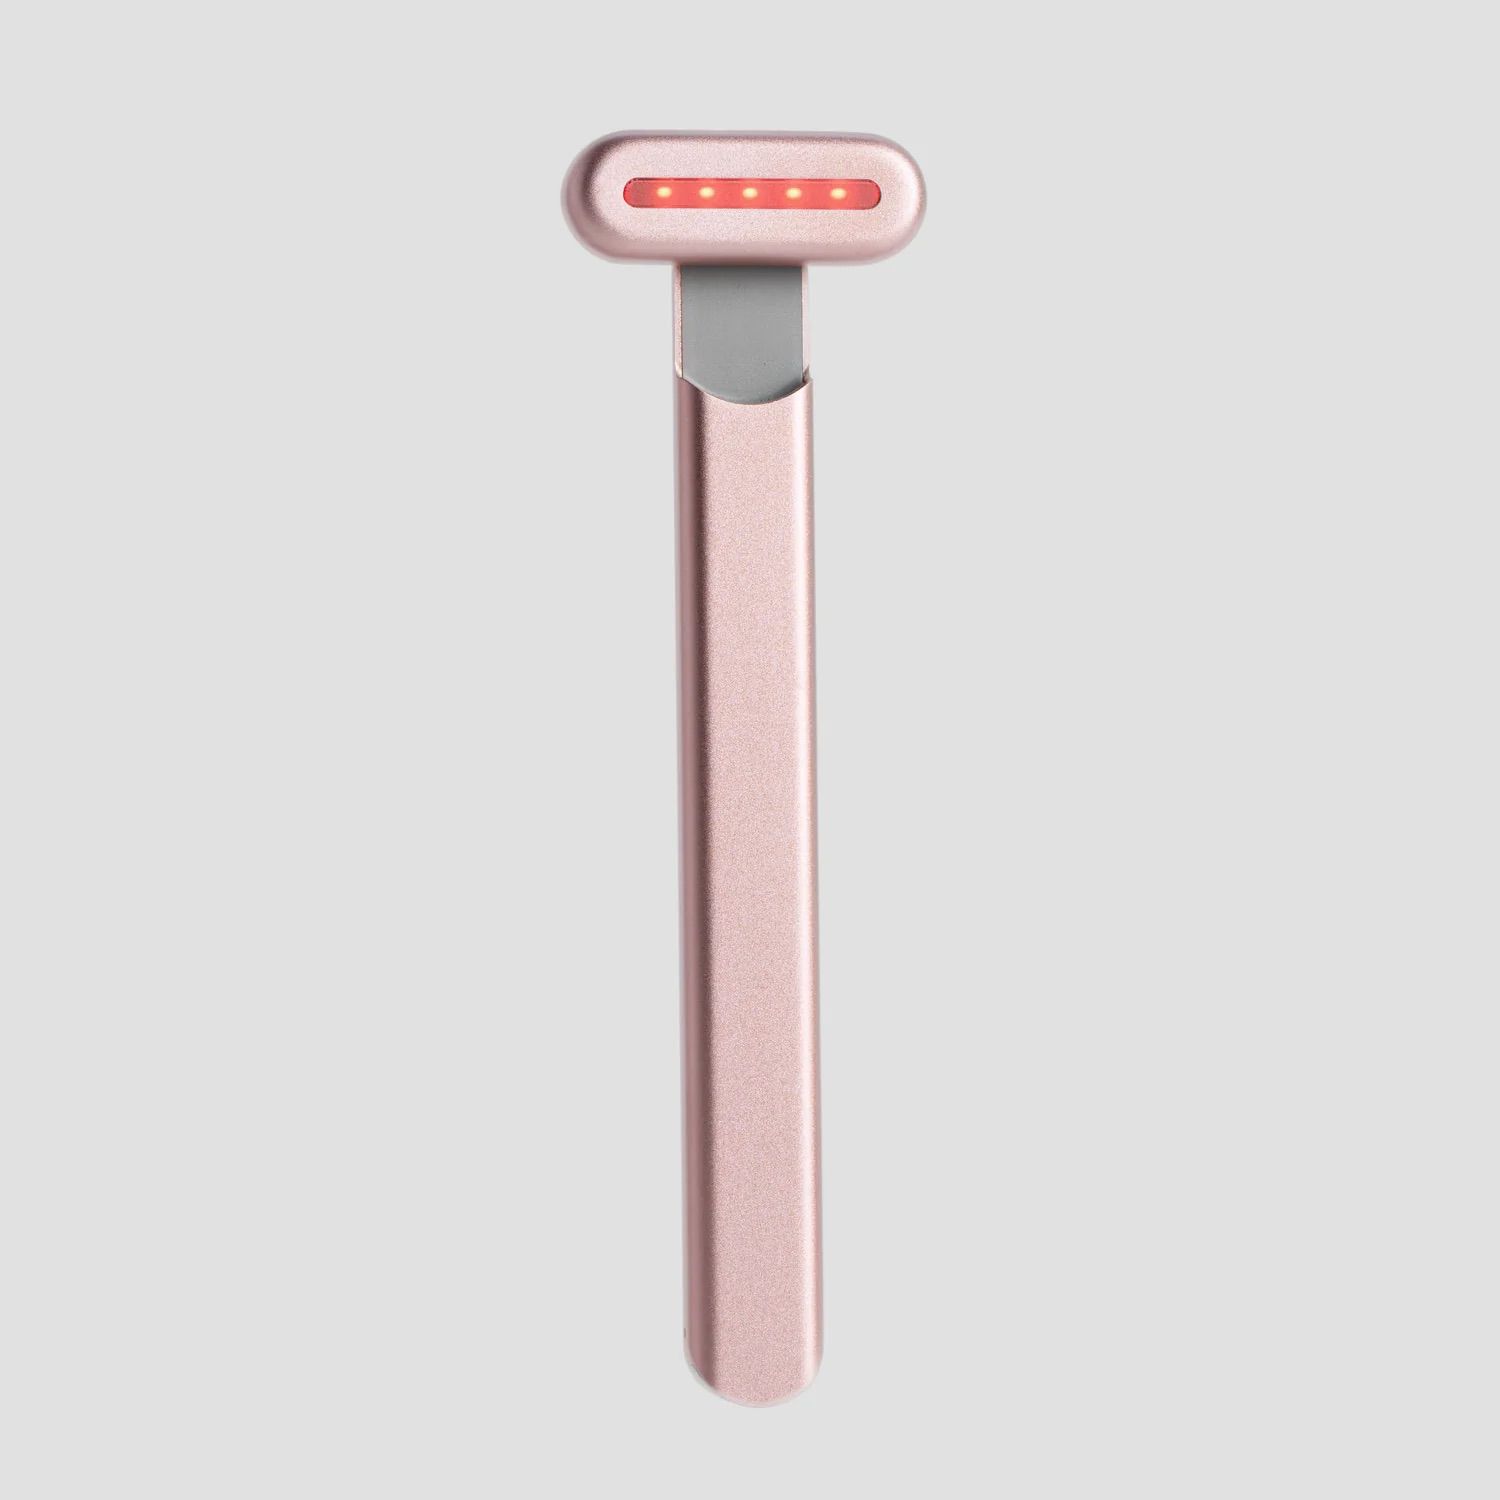 SolaWave Rose Gold Red Light Therapy Wand